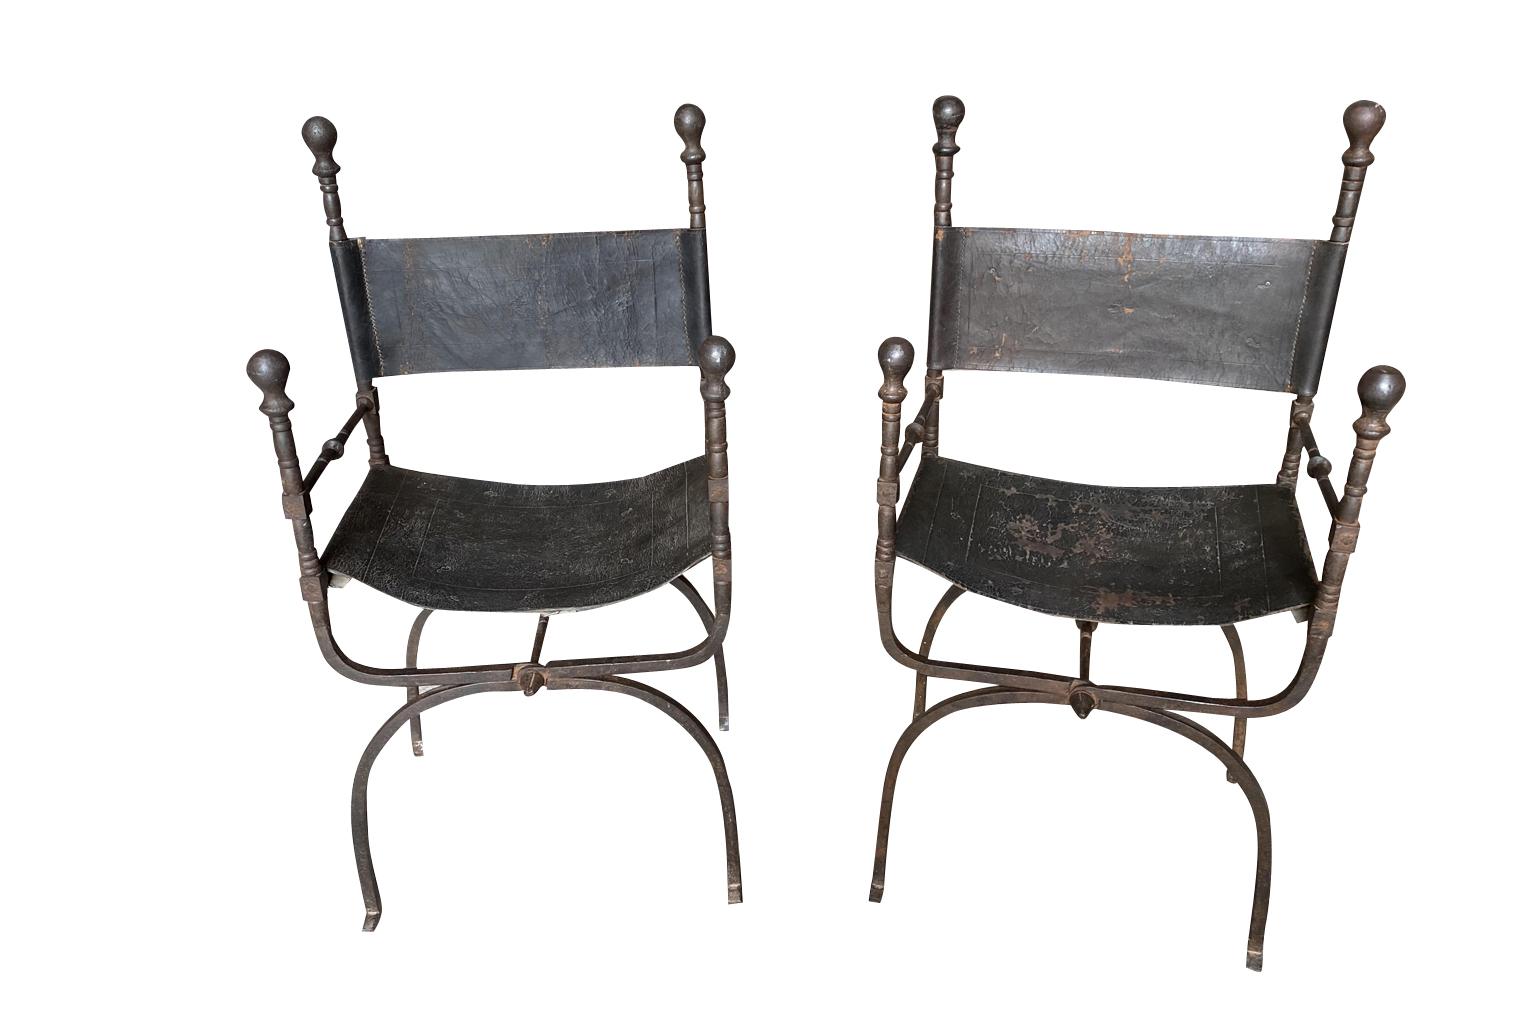 Sensational pair of 18th century armchairs from Spain. Beautifully crafted from hand forged iron and leather. The seat height is 18 1/4